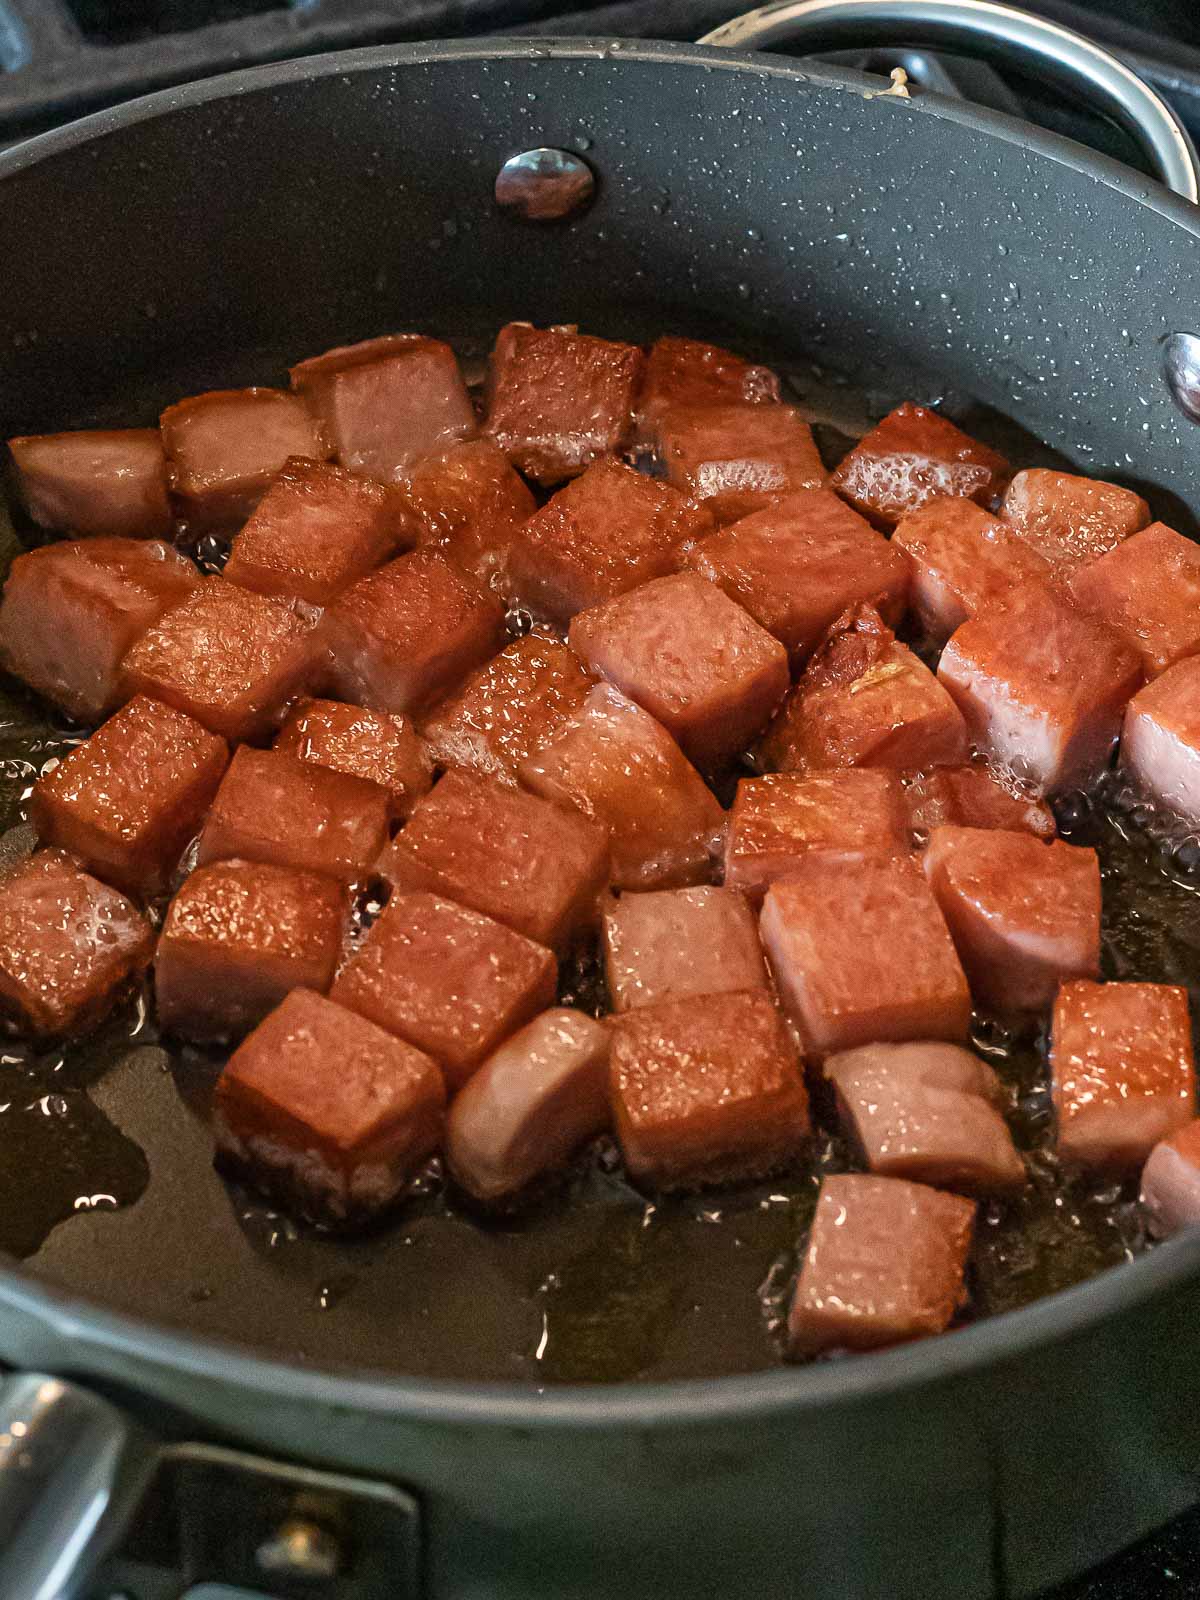 cubes of spam frying in a nonstick pan